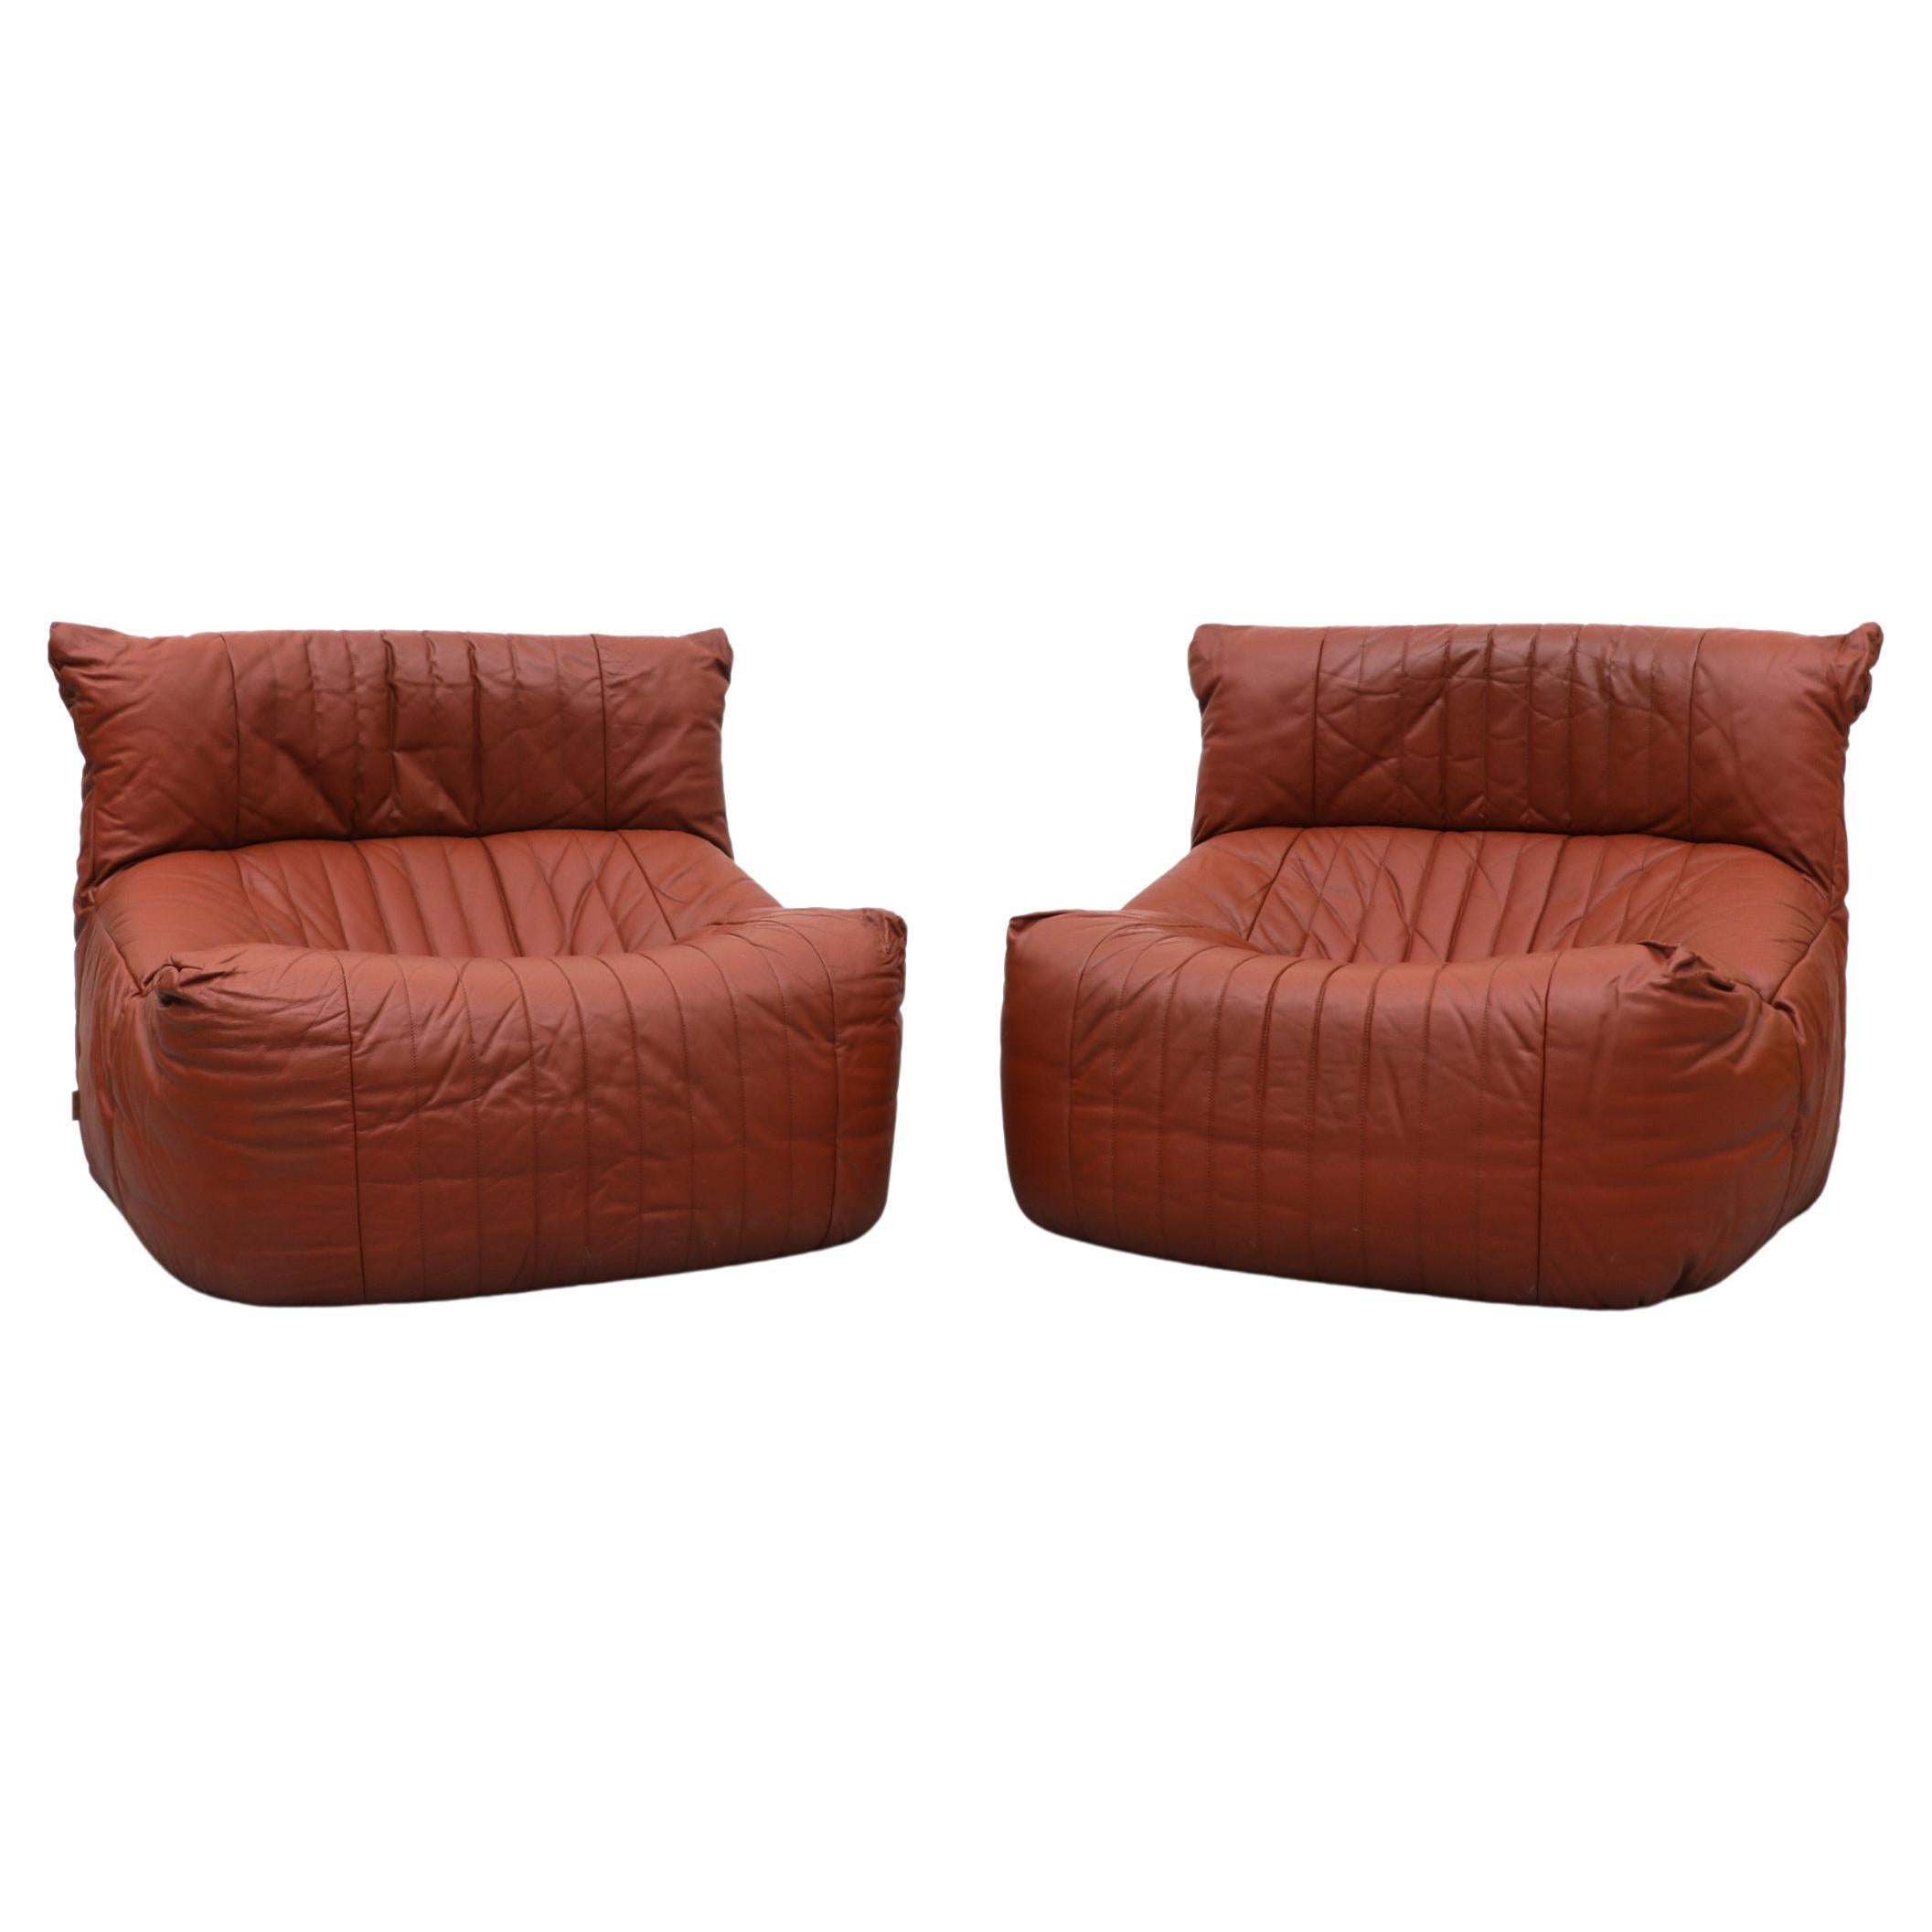 Pair of Ligne Roset 'Aralia' Lounge Chairs by Michel Ducaroy